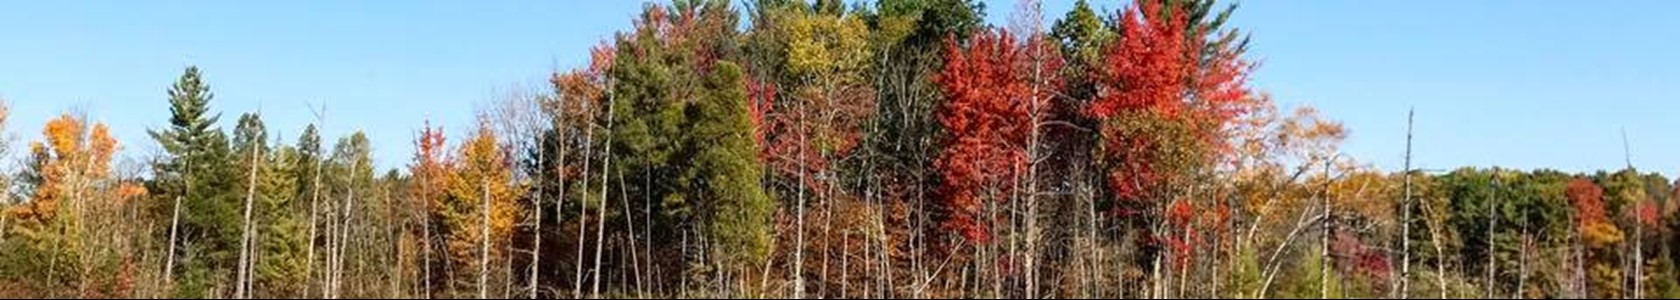 MCC Nature Trails laake view in fall 2018